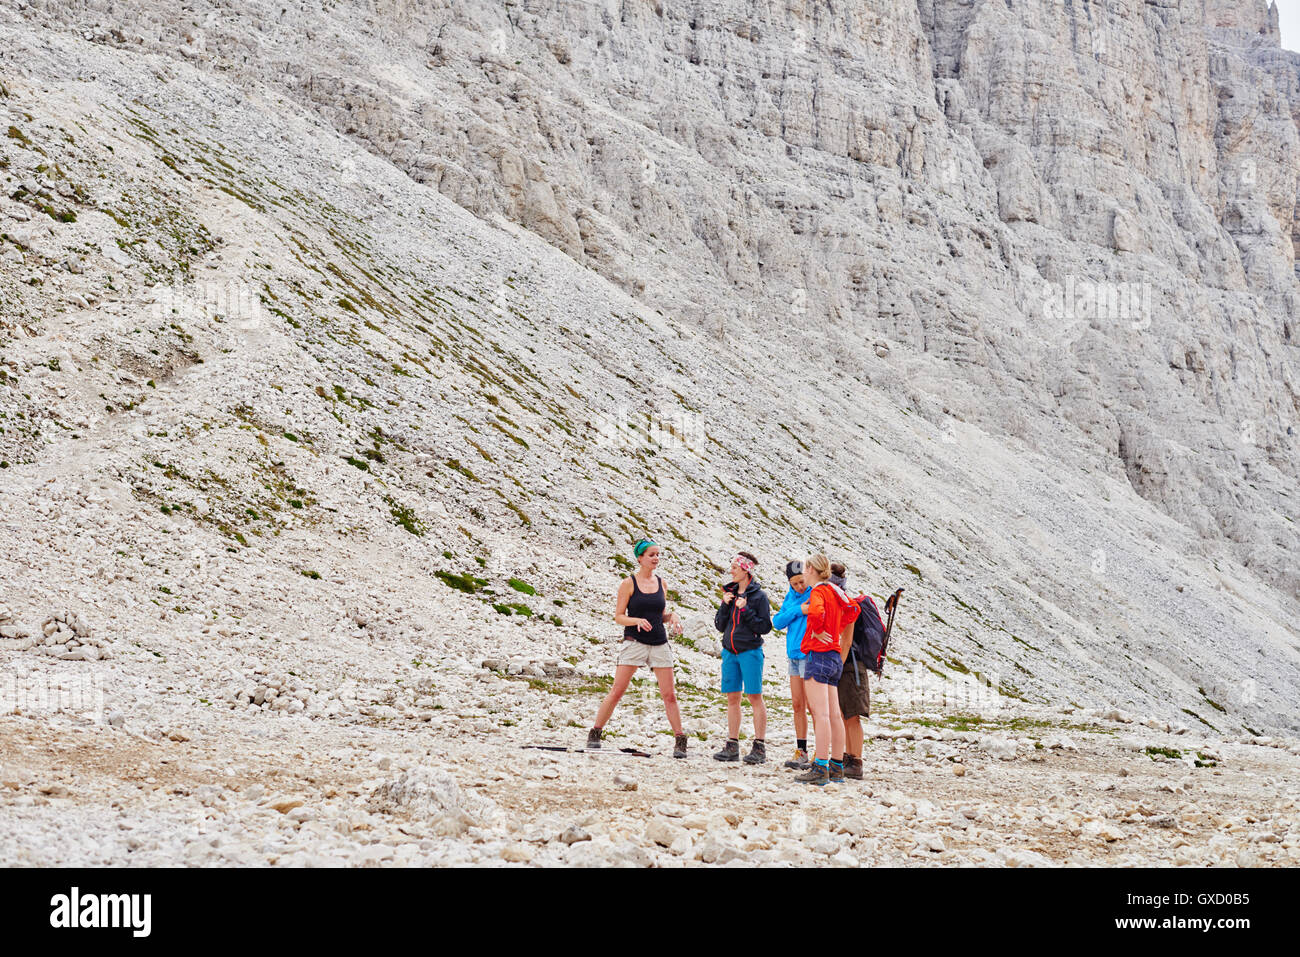 Hikers at bottom of rocky mountain, Austria Stock Photo